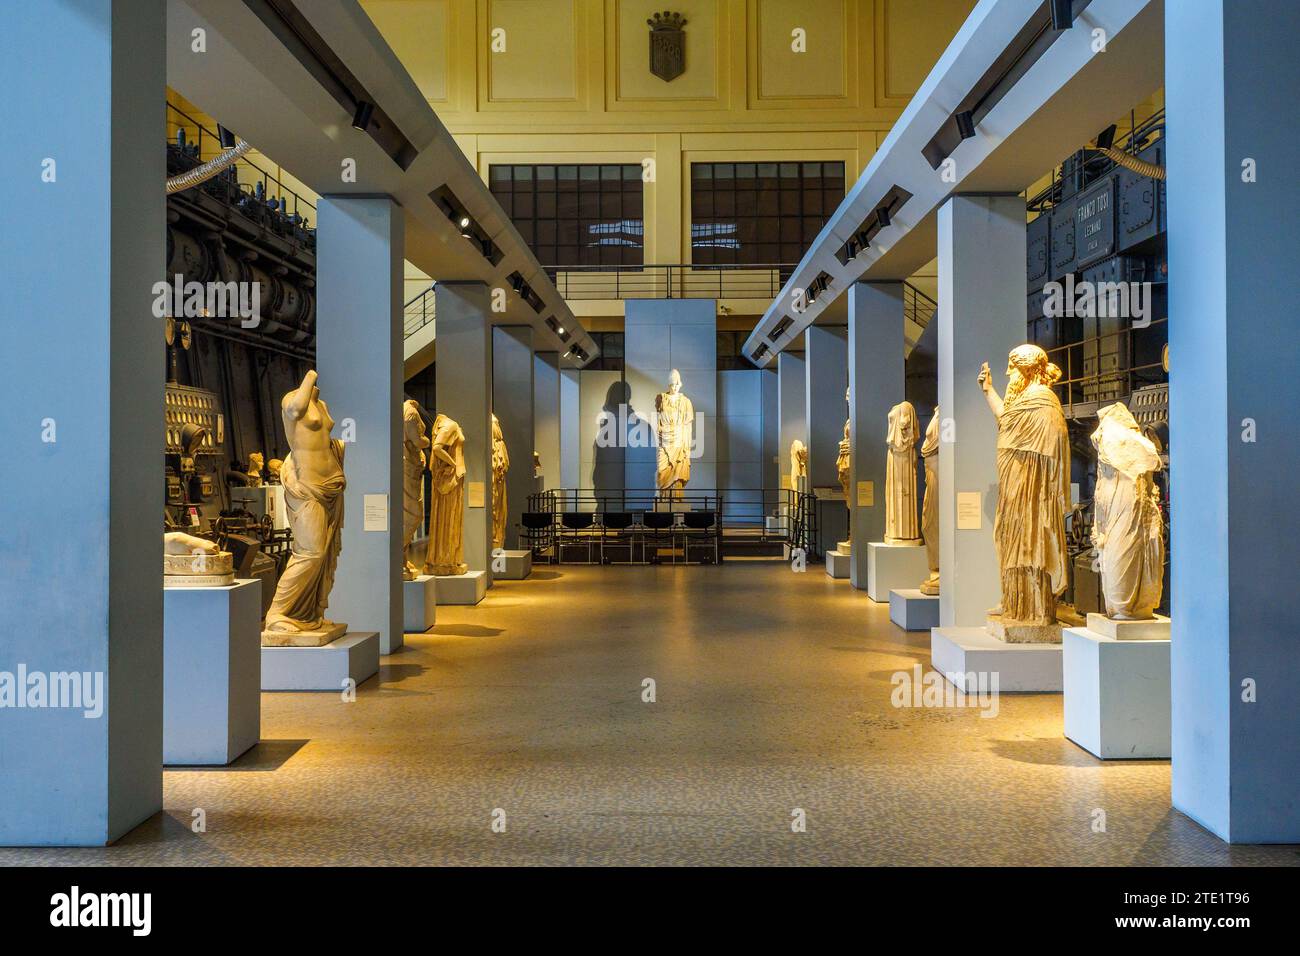 Room with display of ancient statues in the former power station now a museum of ancient art - Museo Centrale Montemartini, Rome, Italy Stock Photo